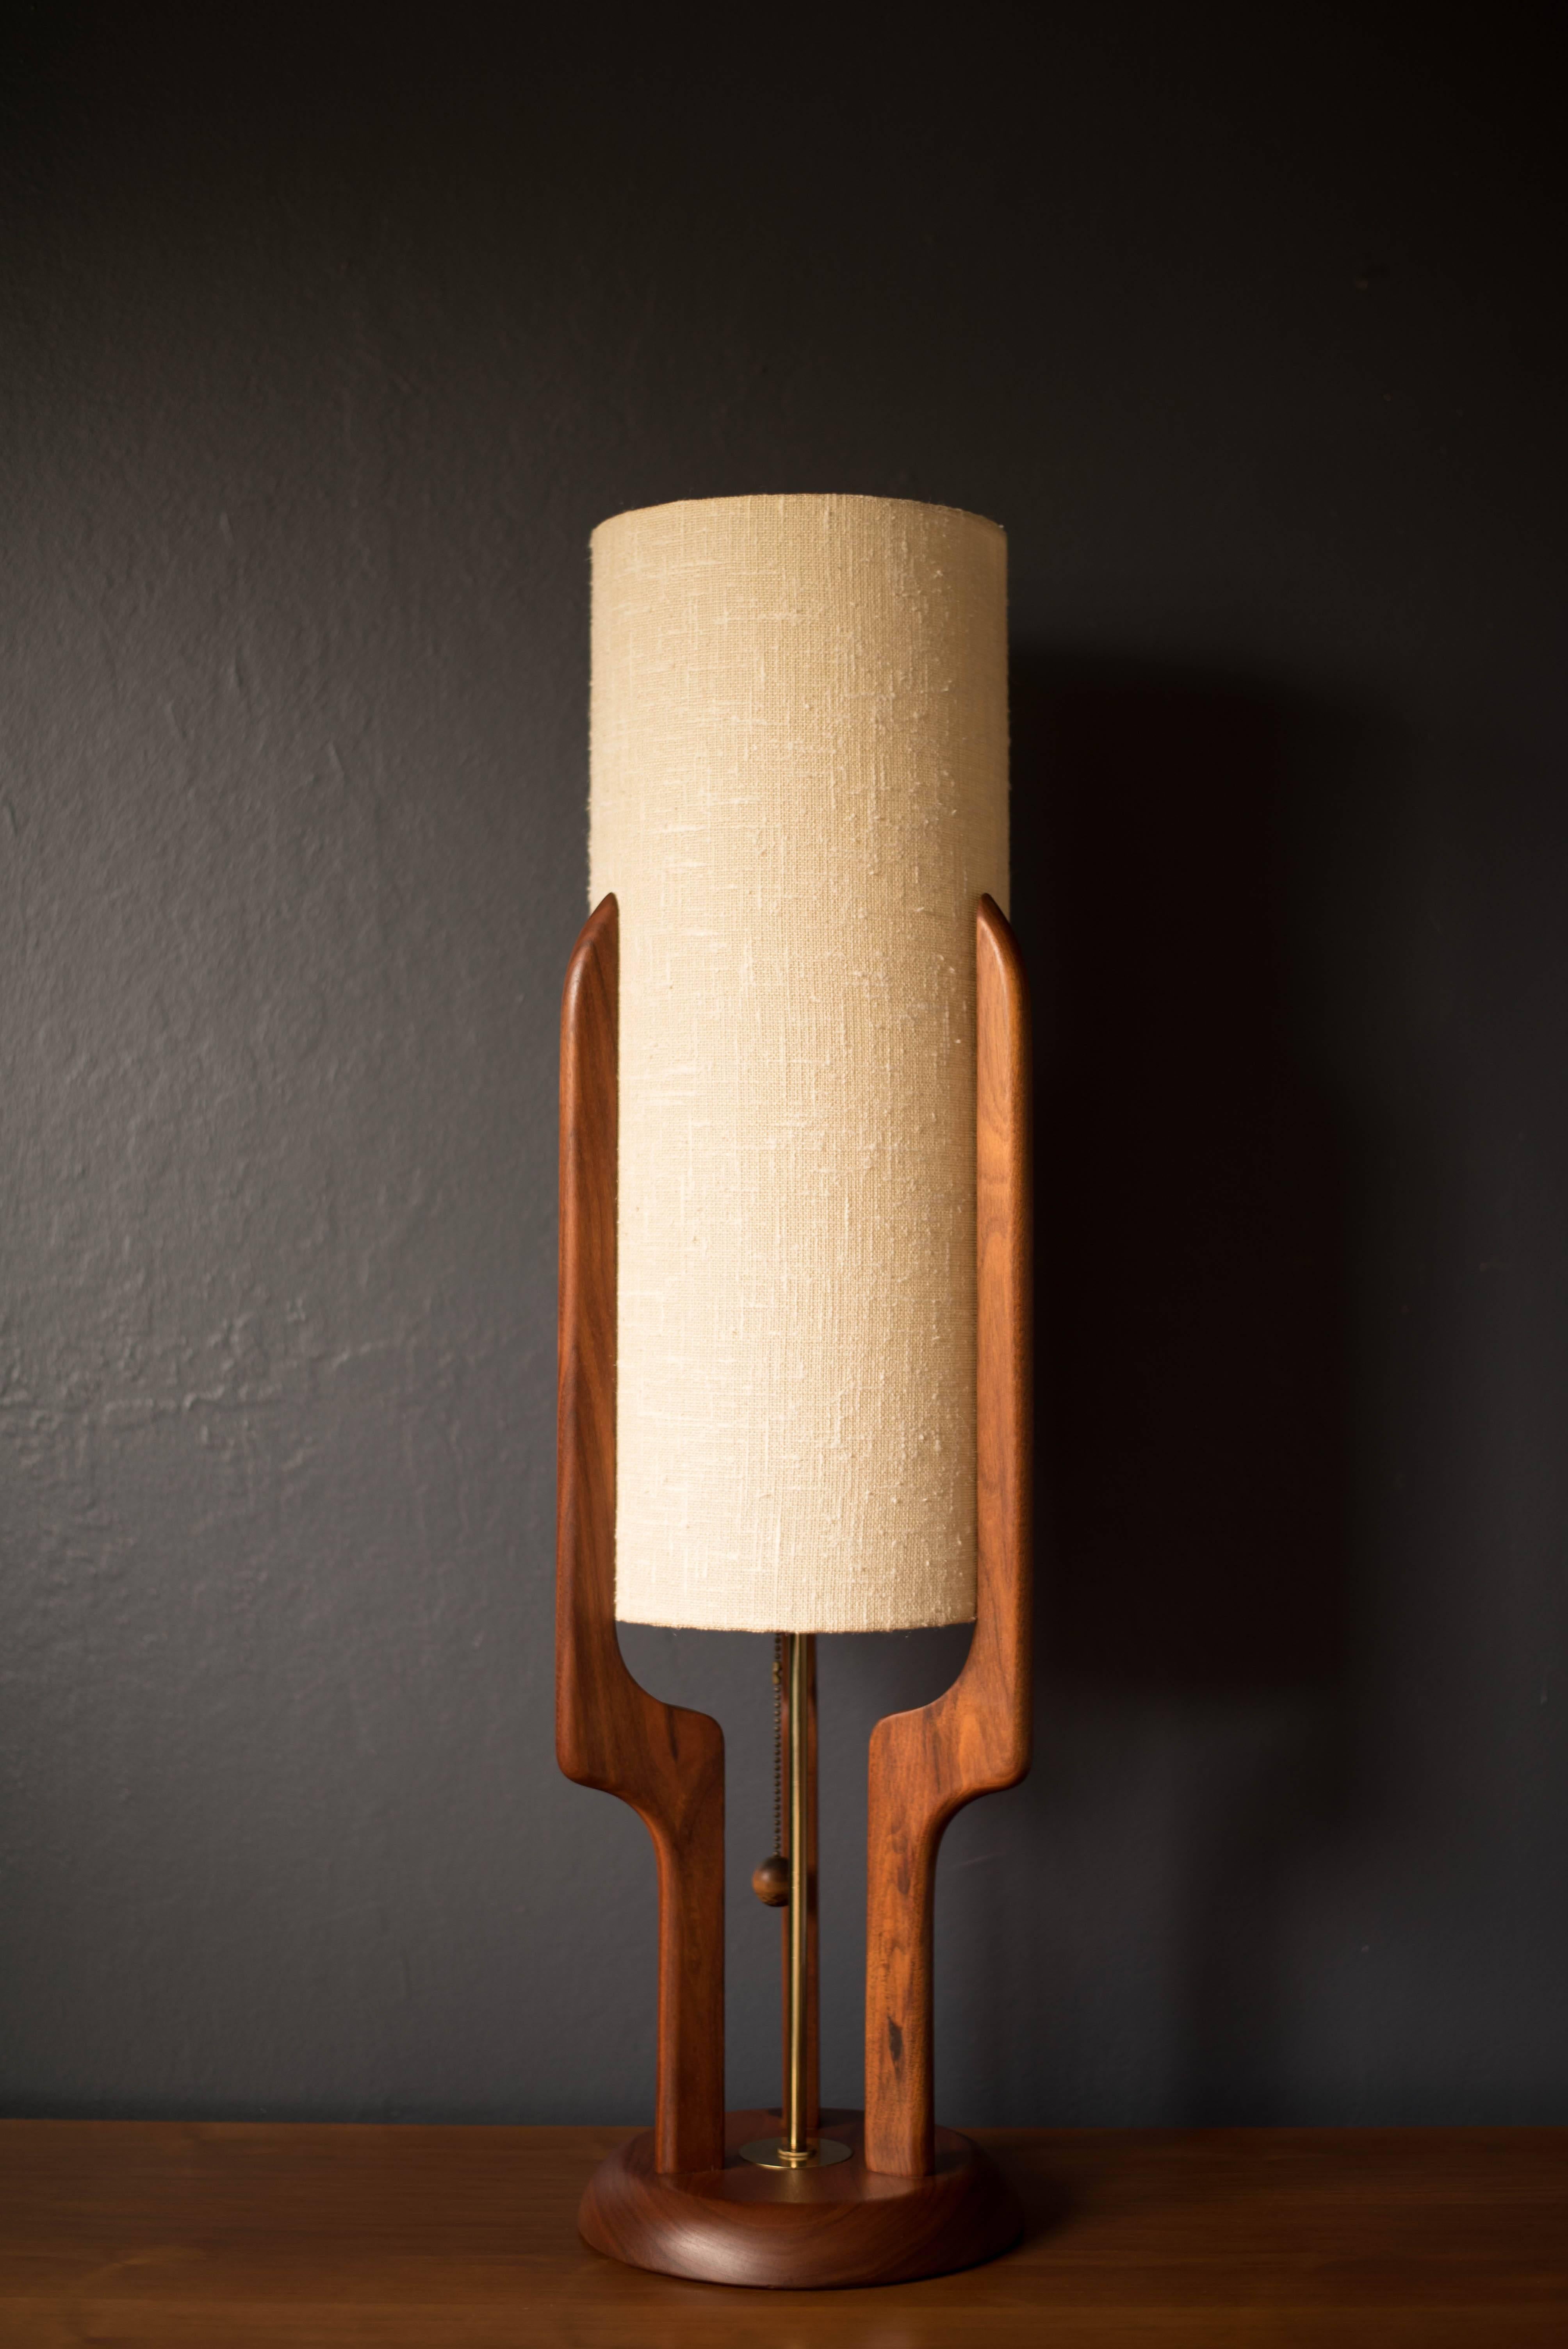 Mid-Century Modern sculpted walnut lamp, circa 1960s. This piece features a stunning walnut base and includes the original shade.

